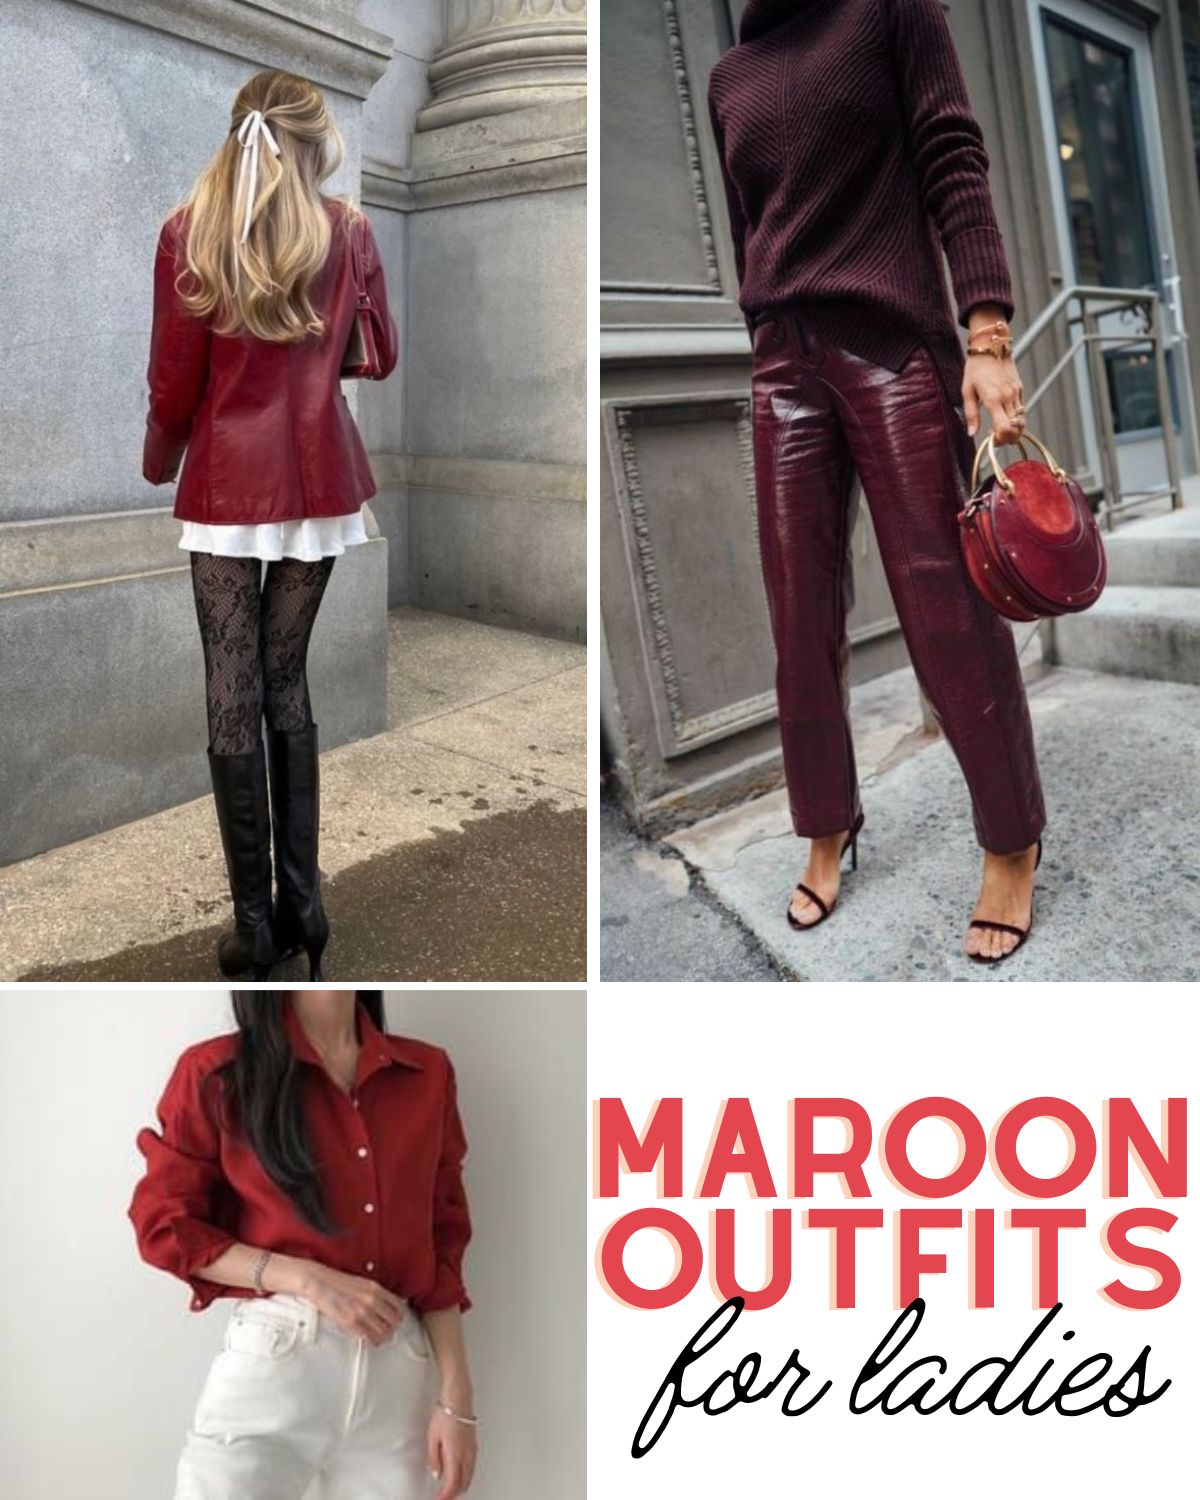 Girls wearing cute fall outfits in a deep red